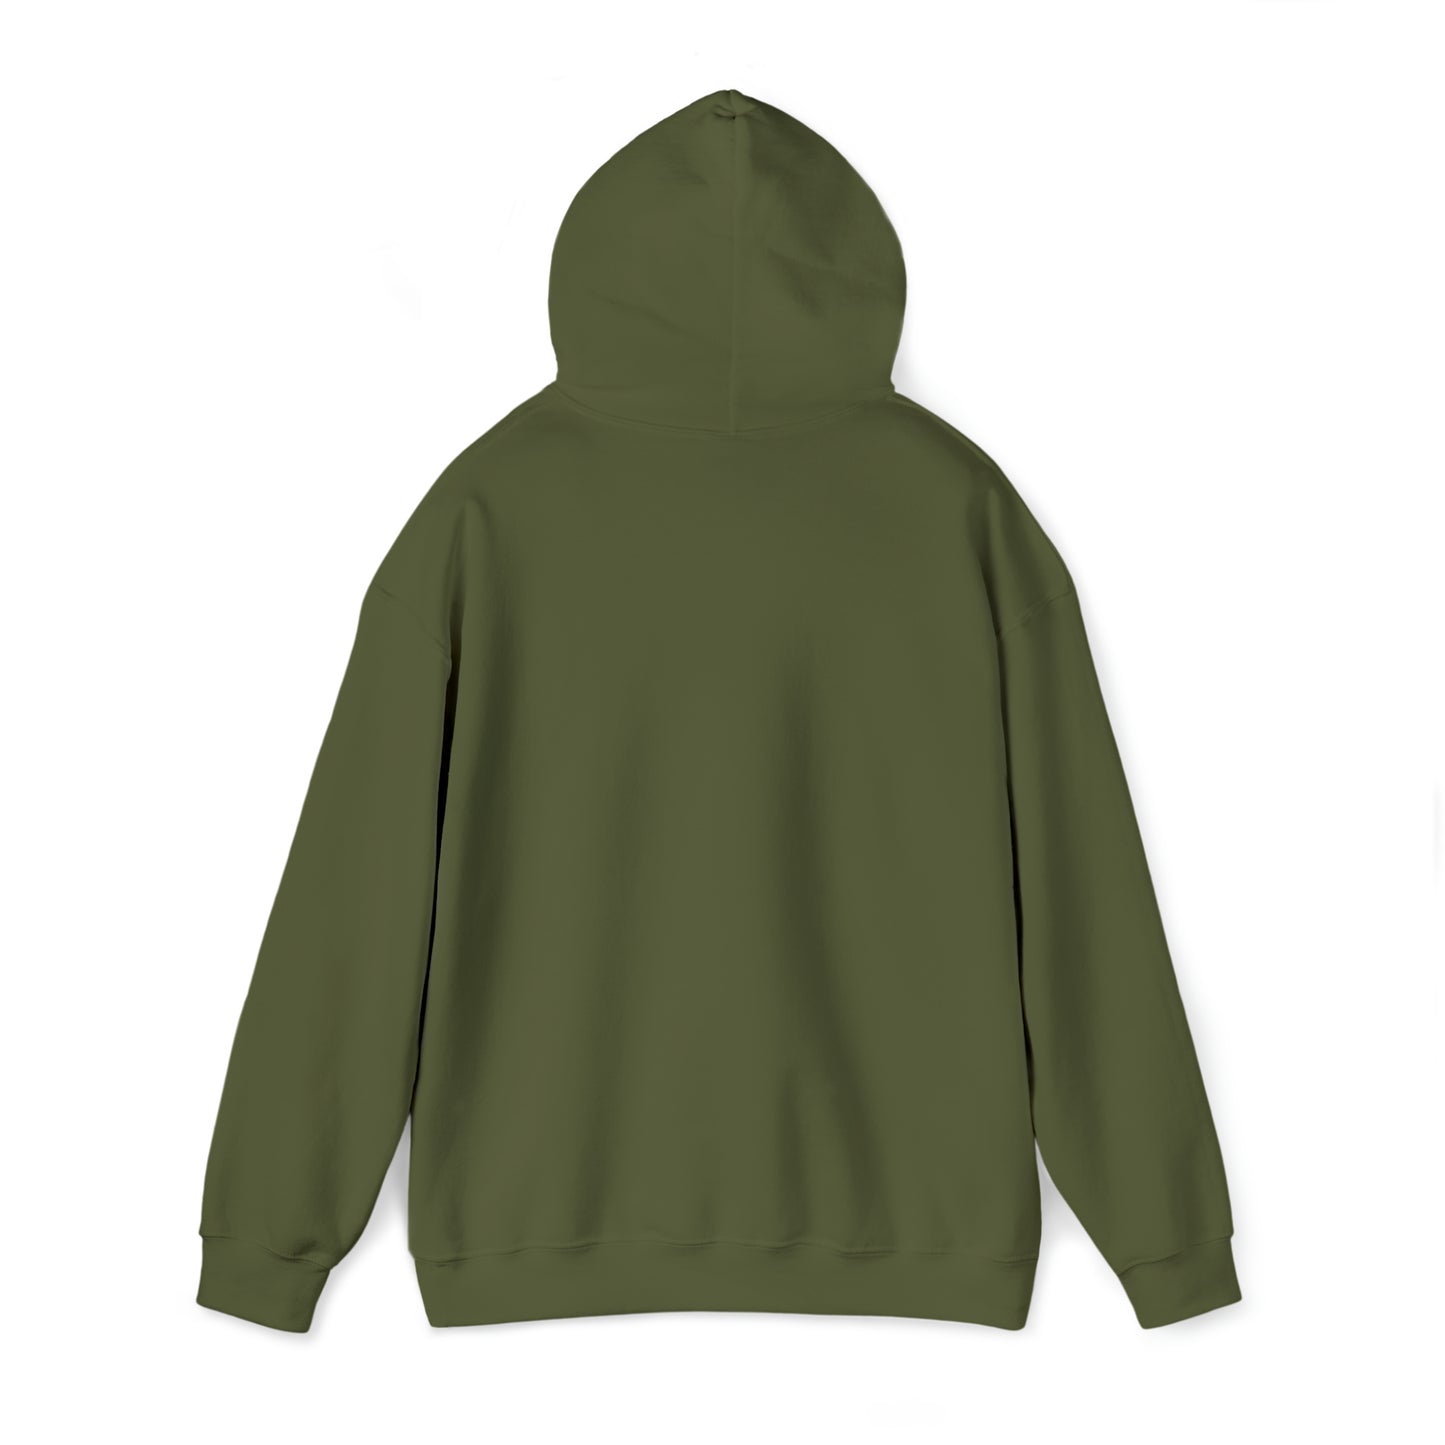 The Seven Inches Hoodie™